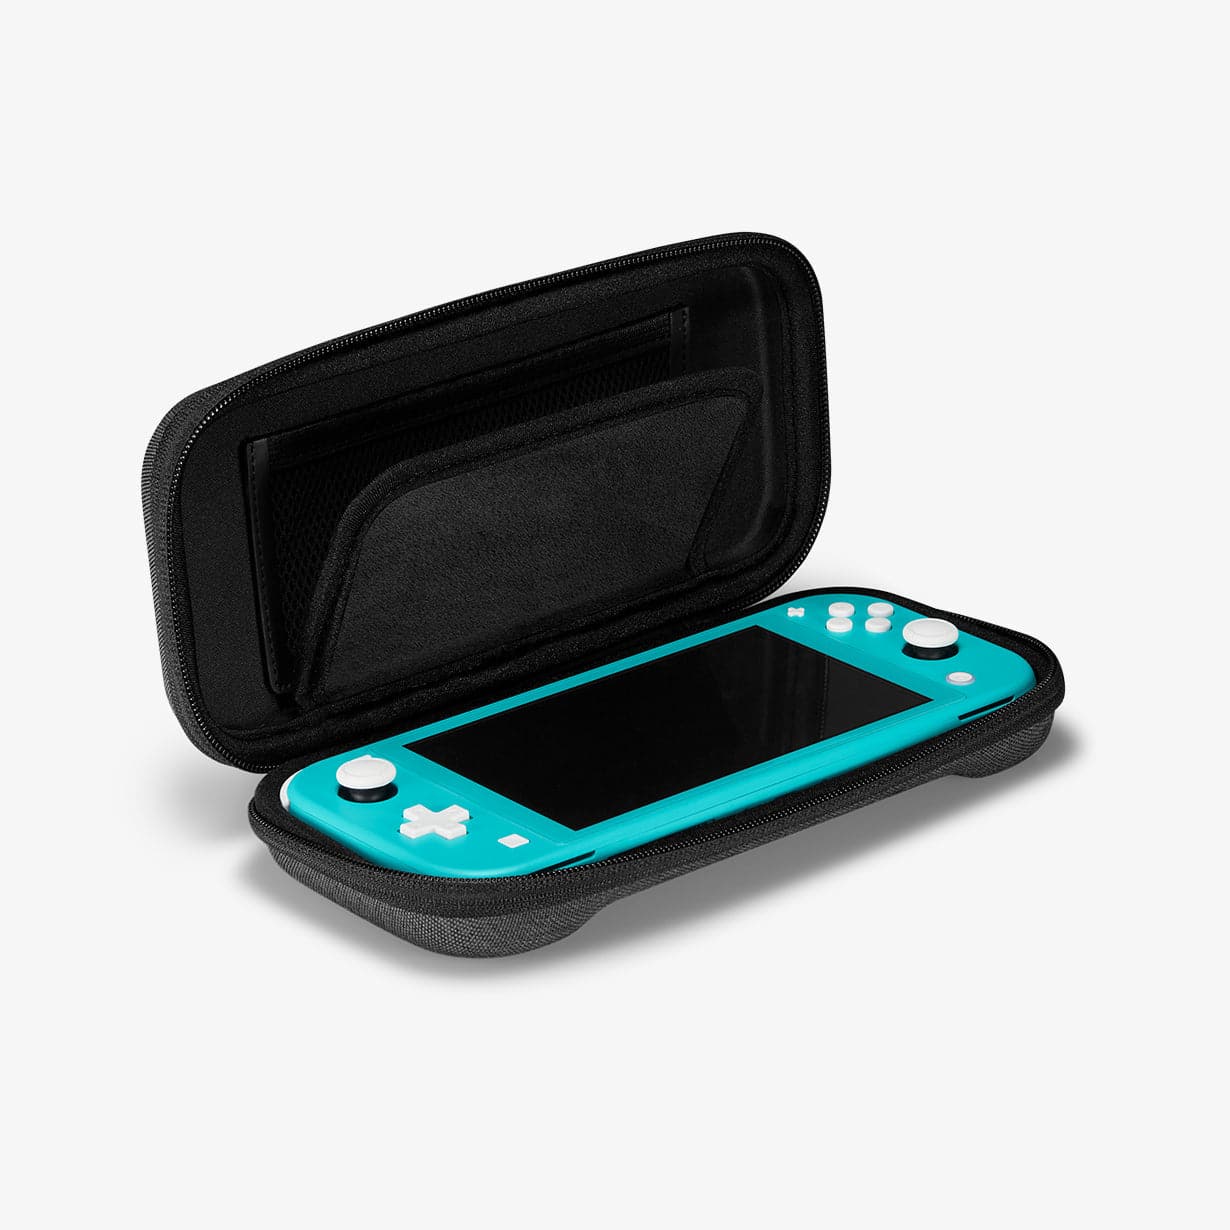 AFA00865 - Nintendo Switch Lite Case Klasden Pouch showing the inside and side with device inside